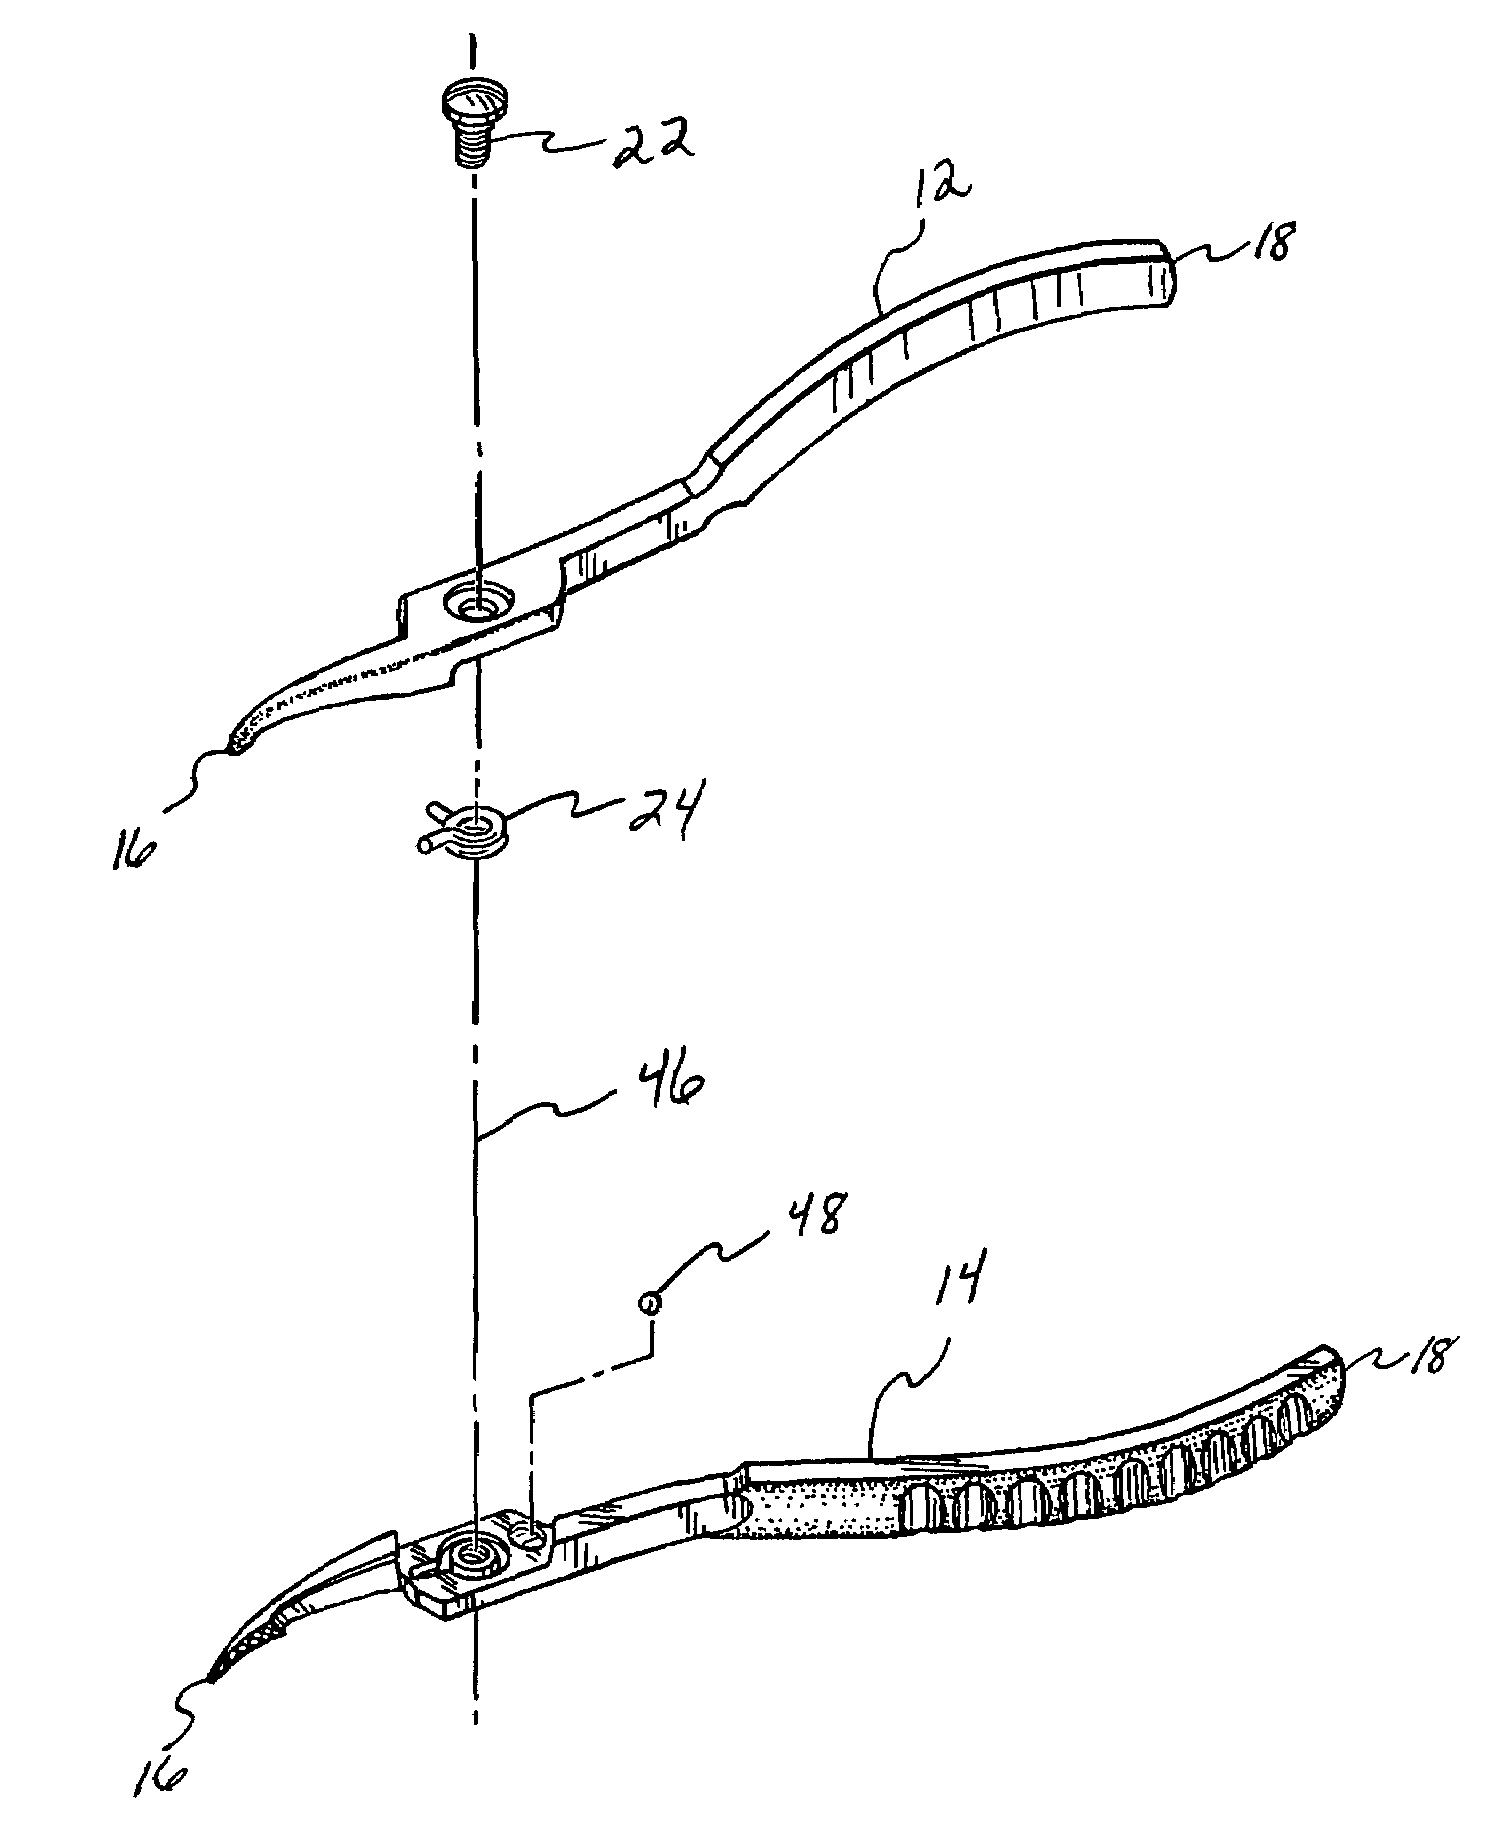 Orthodontic pliers and methods of using the same